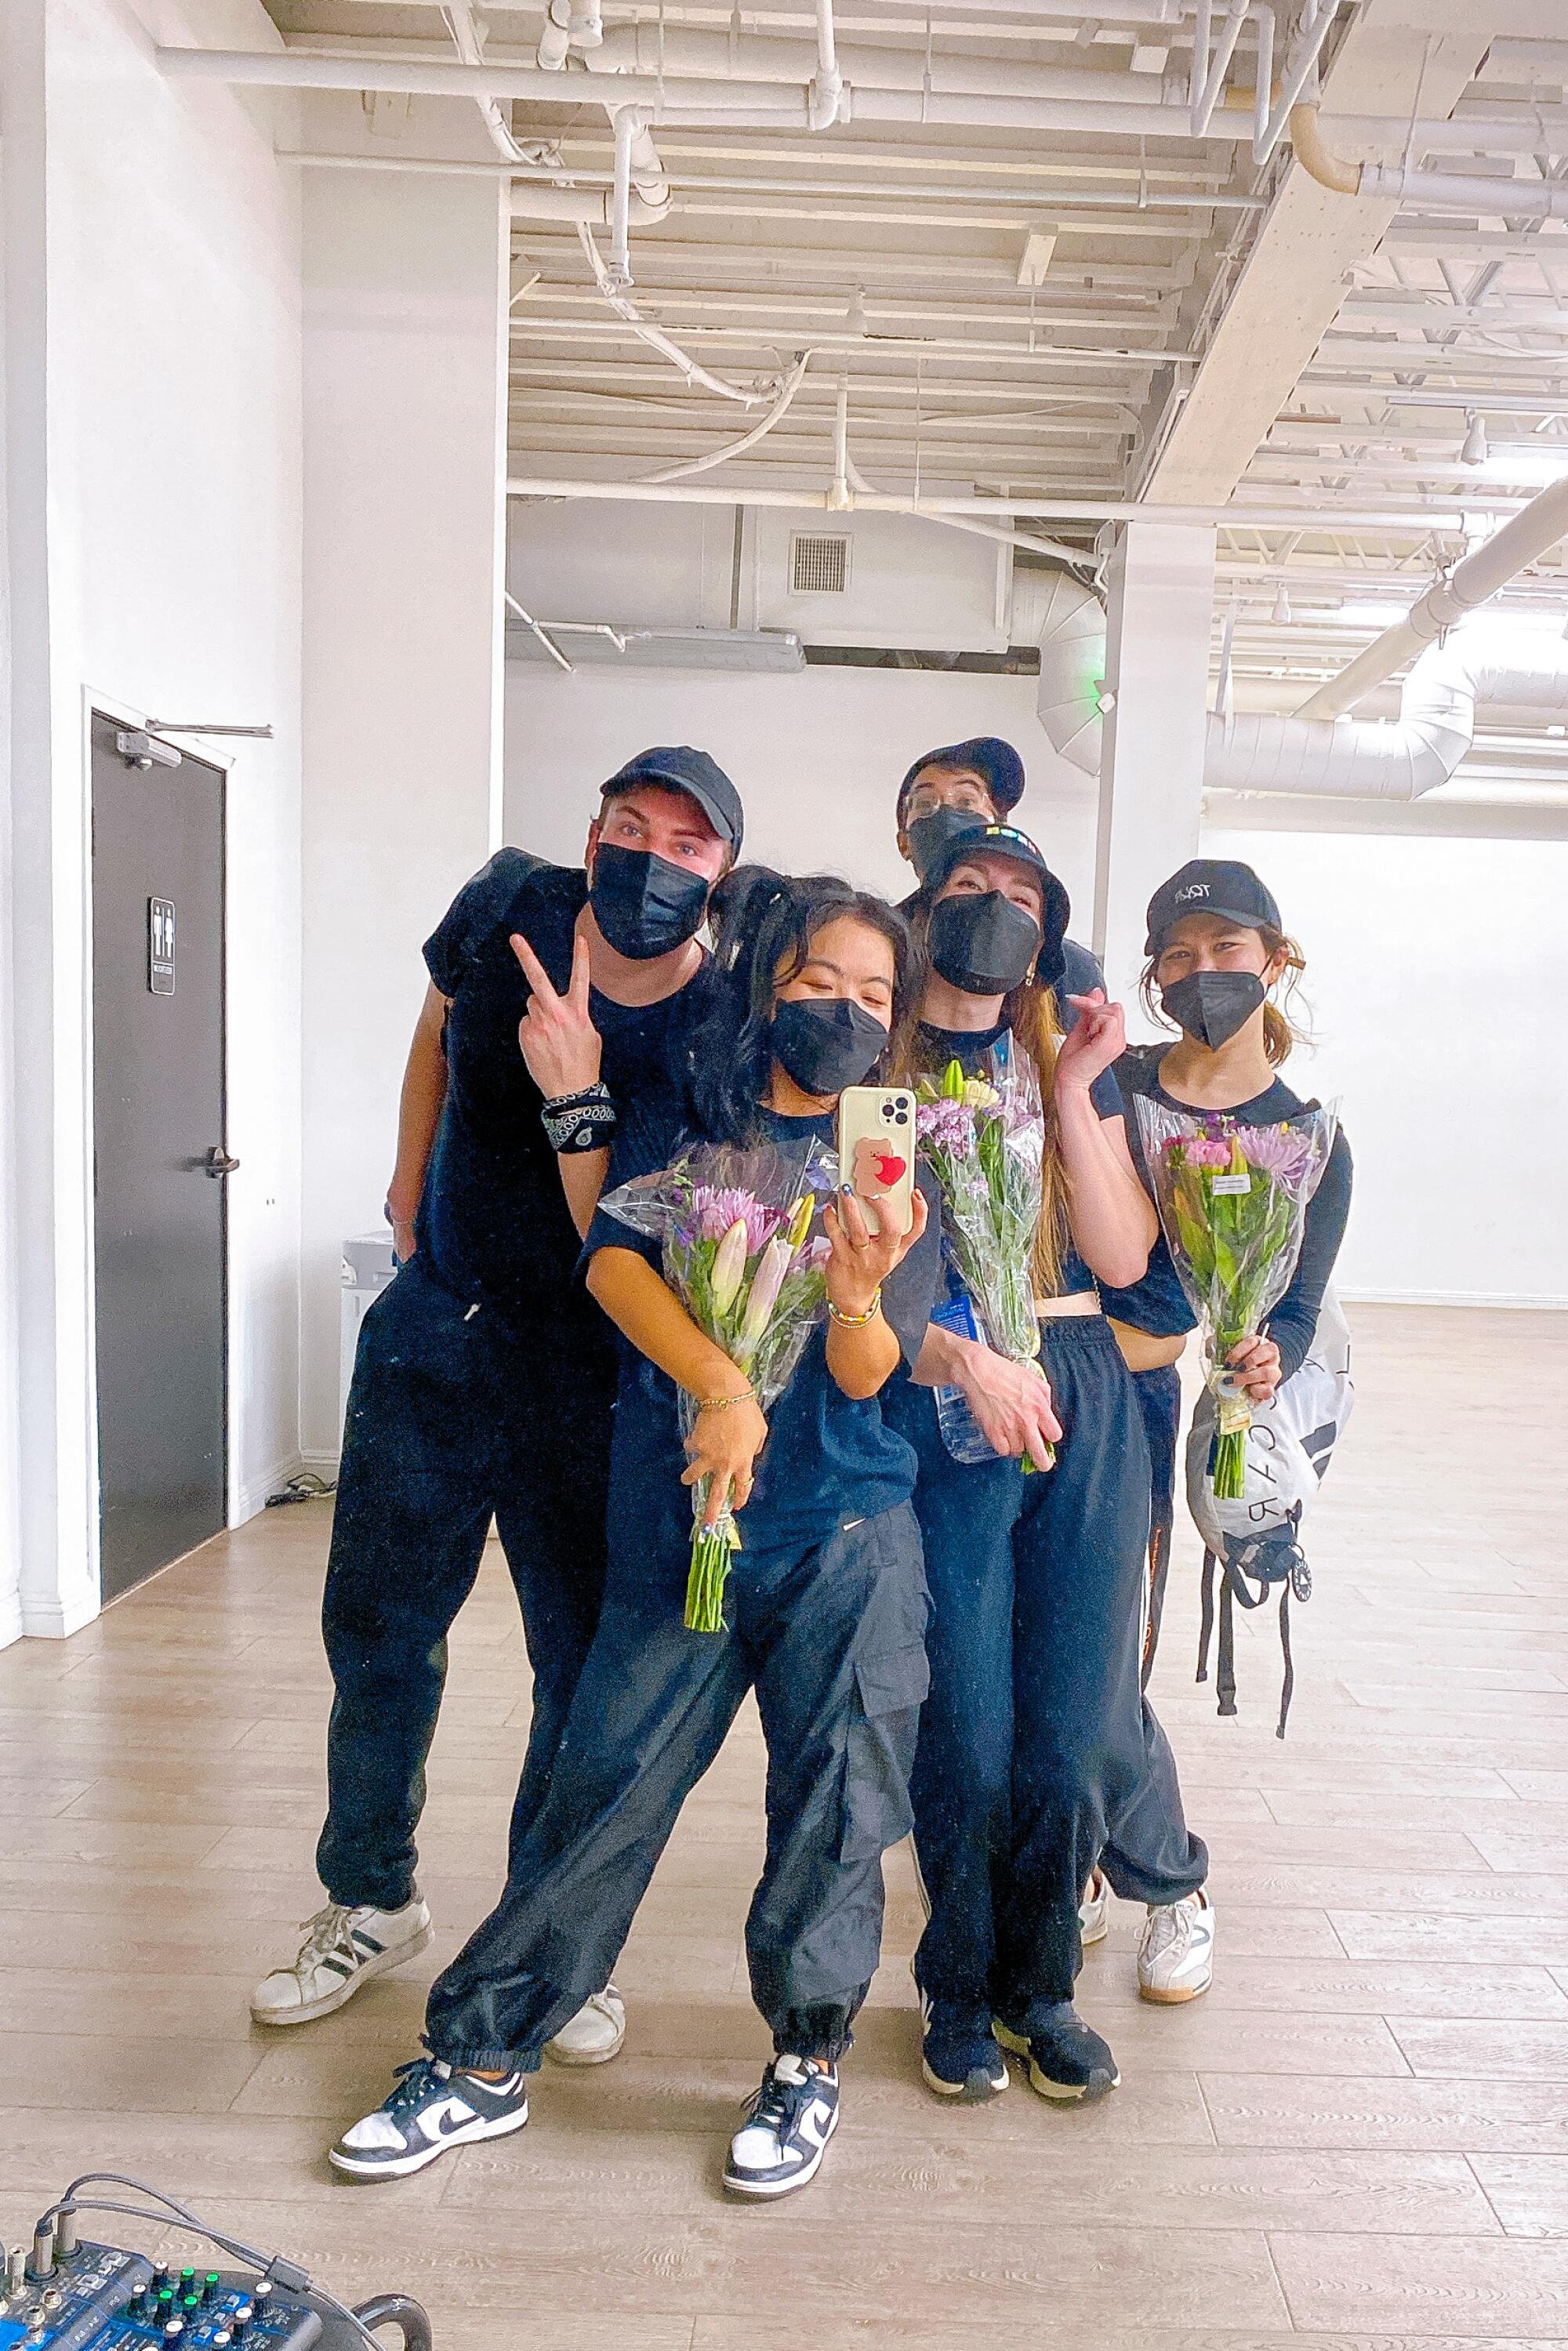 A group of people wearing masks.